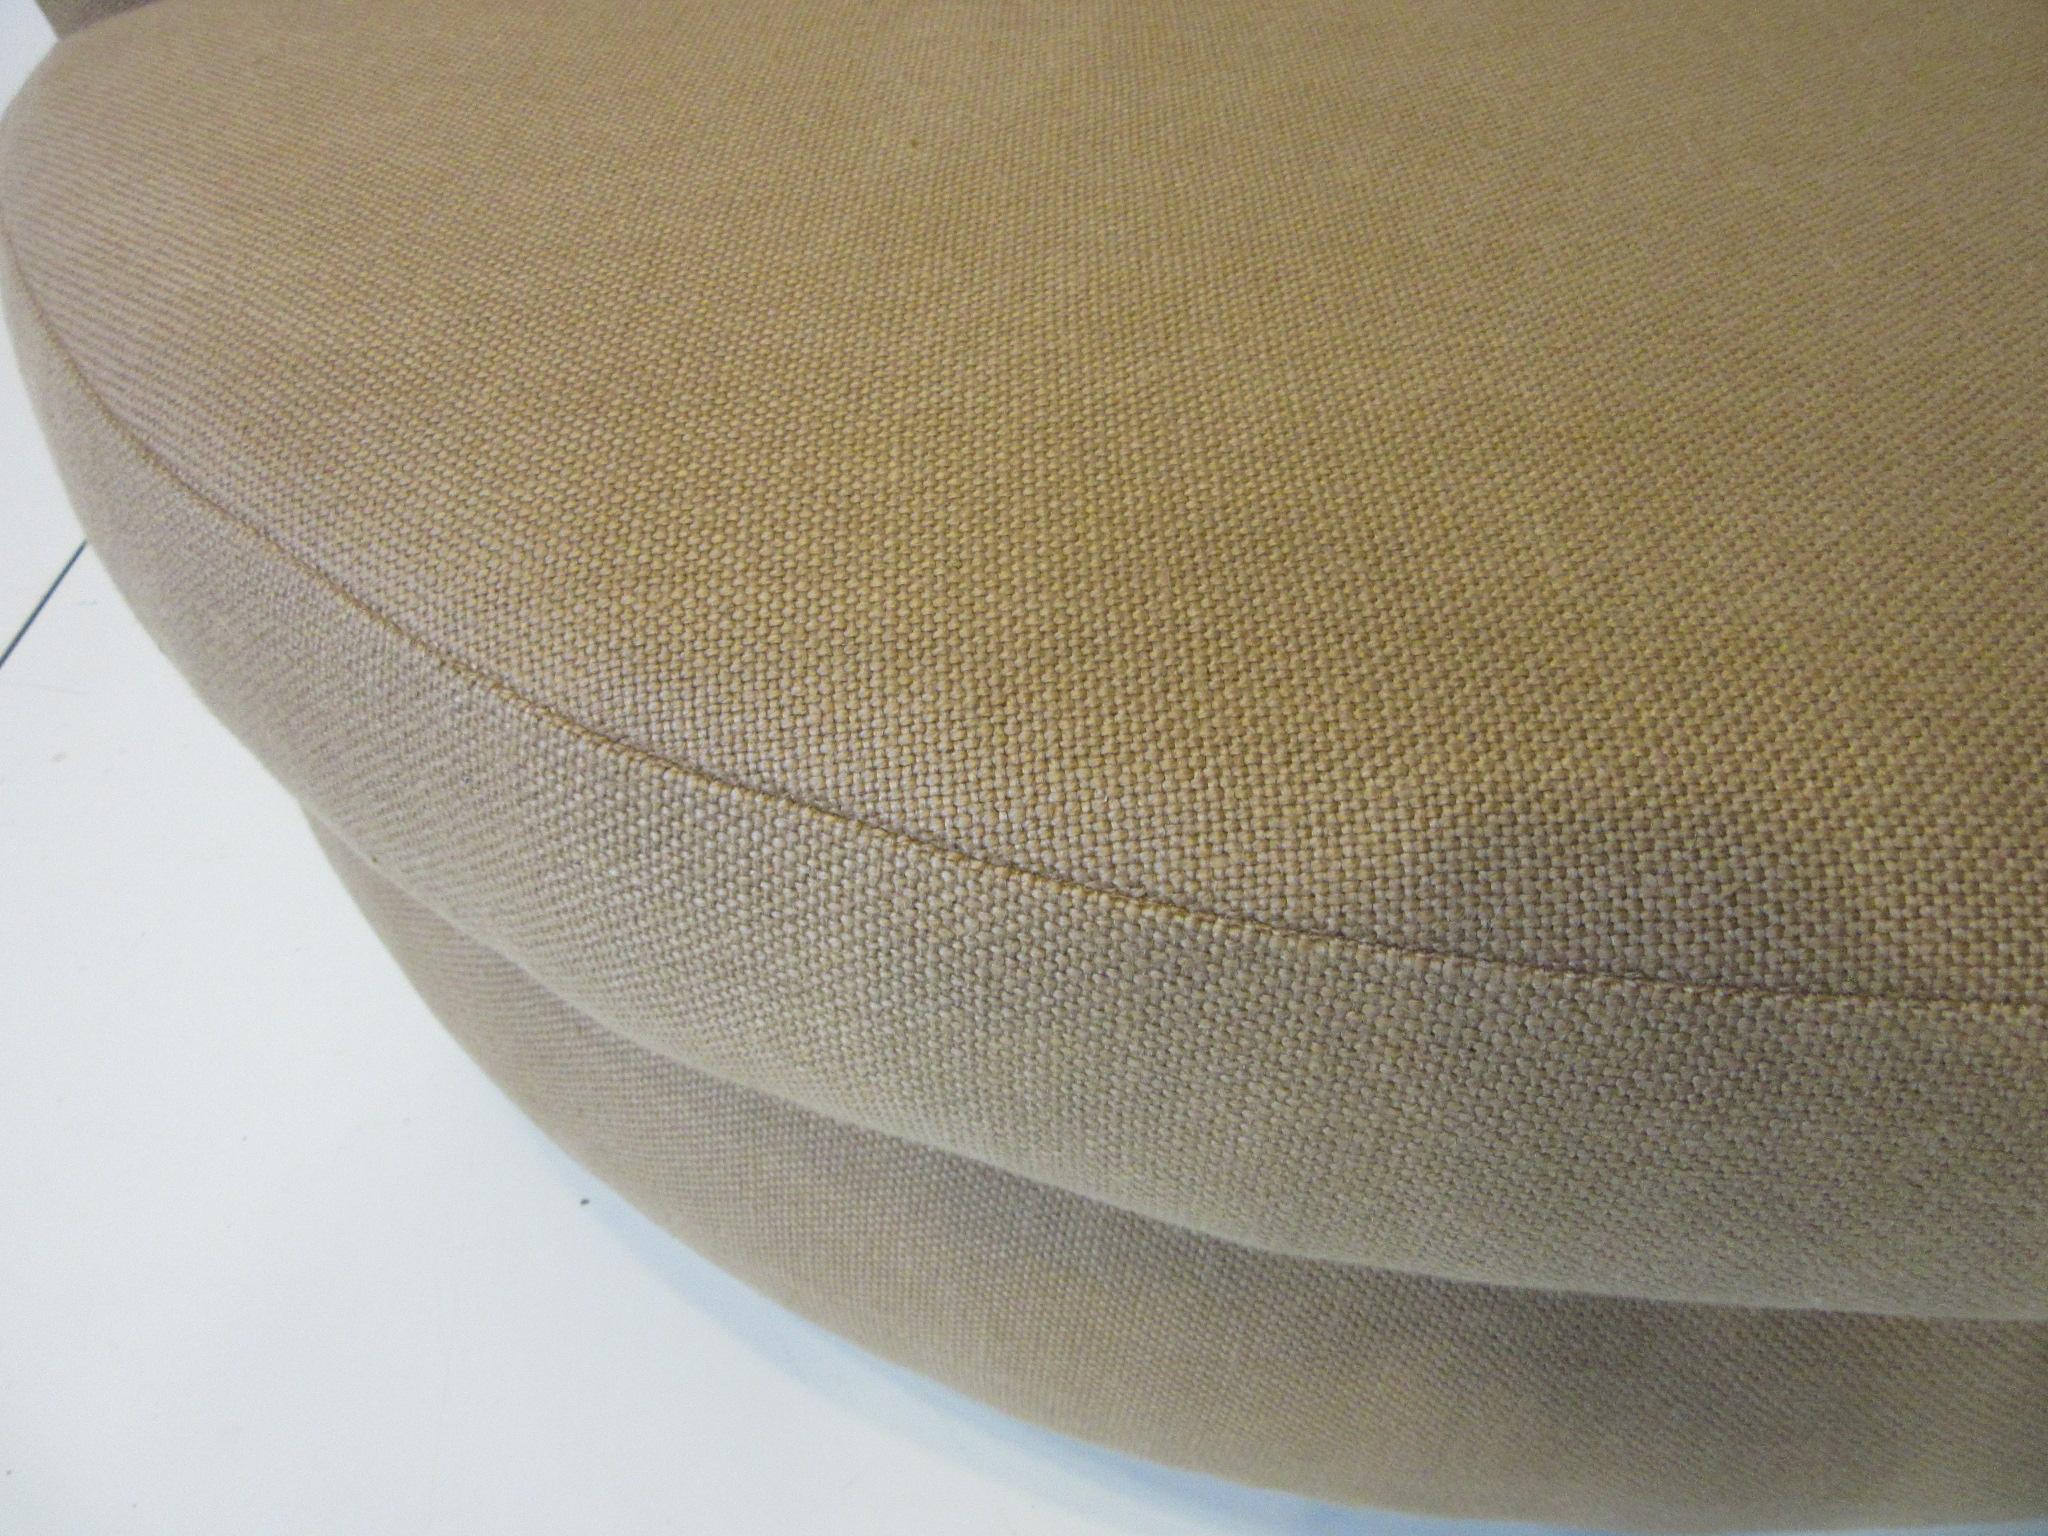 Upholstery Round Lounger / Sofa Chair in the Style of Baughman / Pearsall